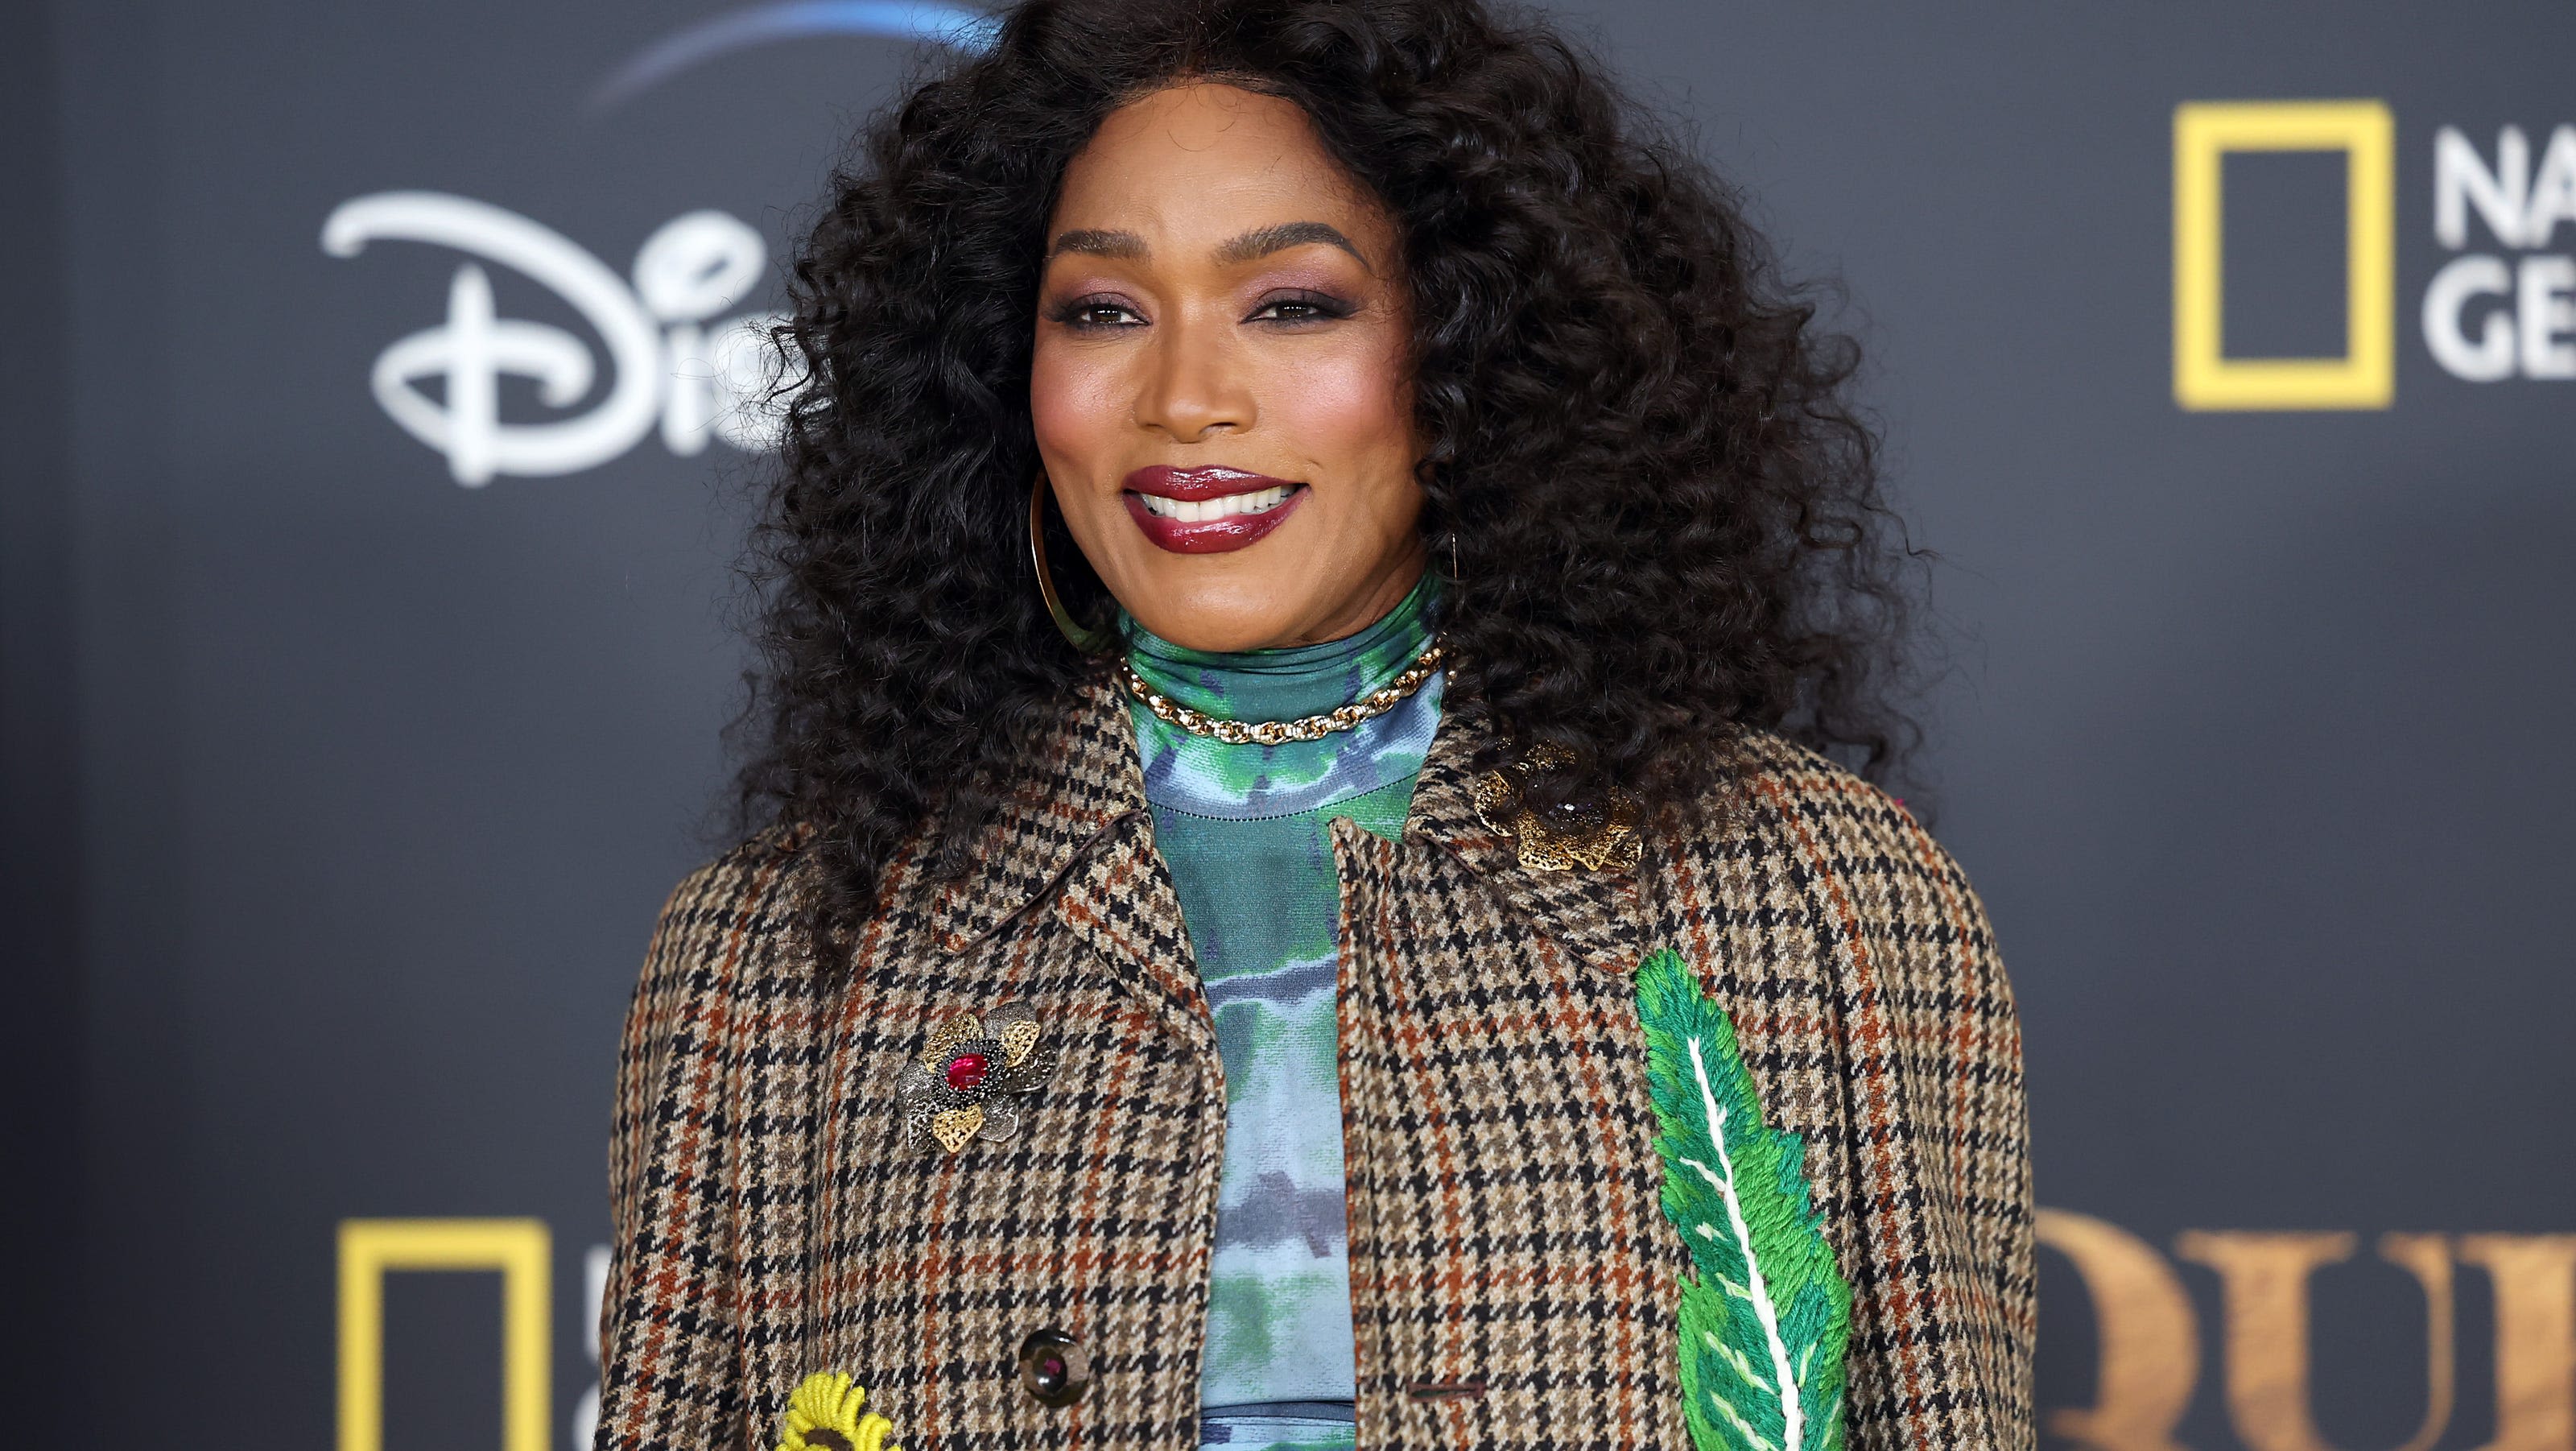 Angela Bassett mourns loss of '9-1-1' crew member who died in crash: 'We're all rocked by it'